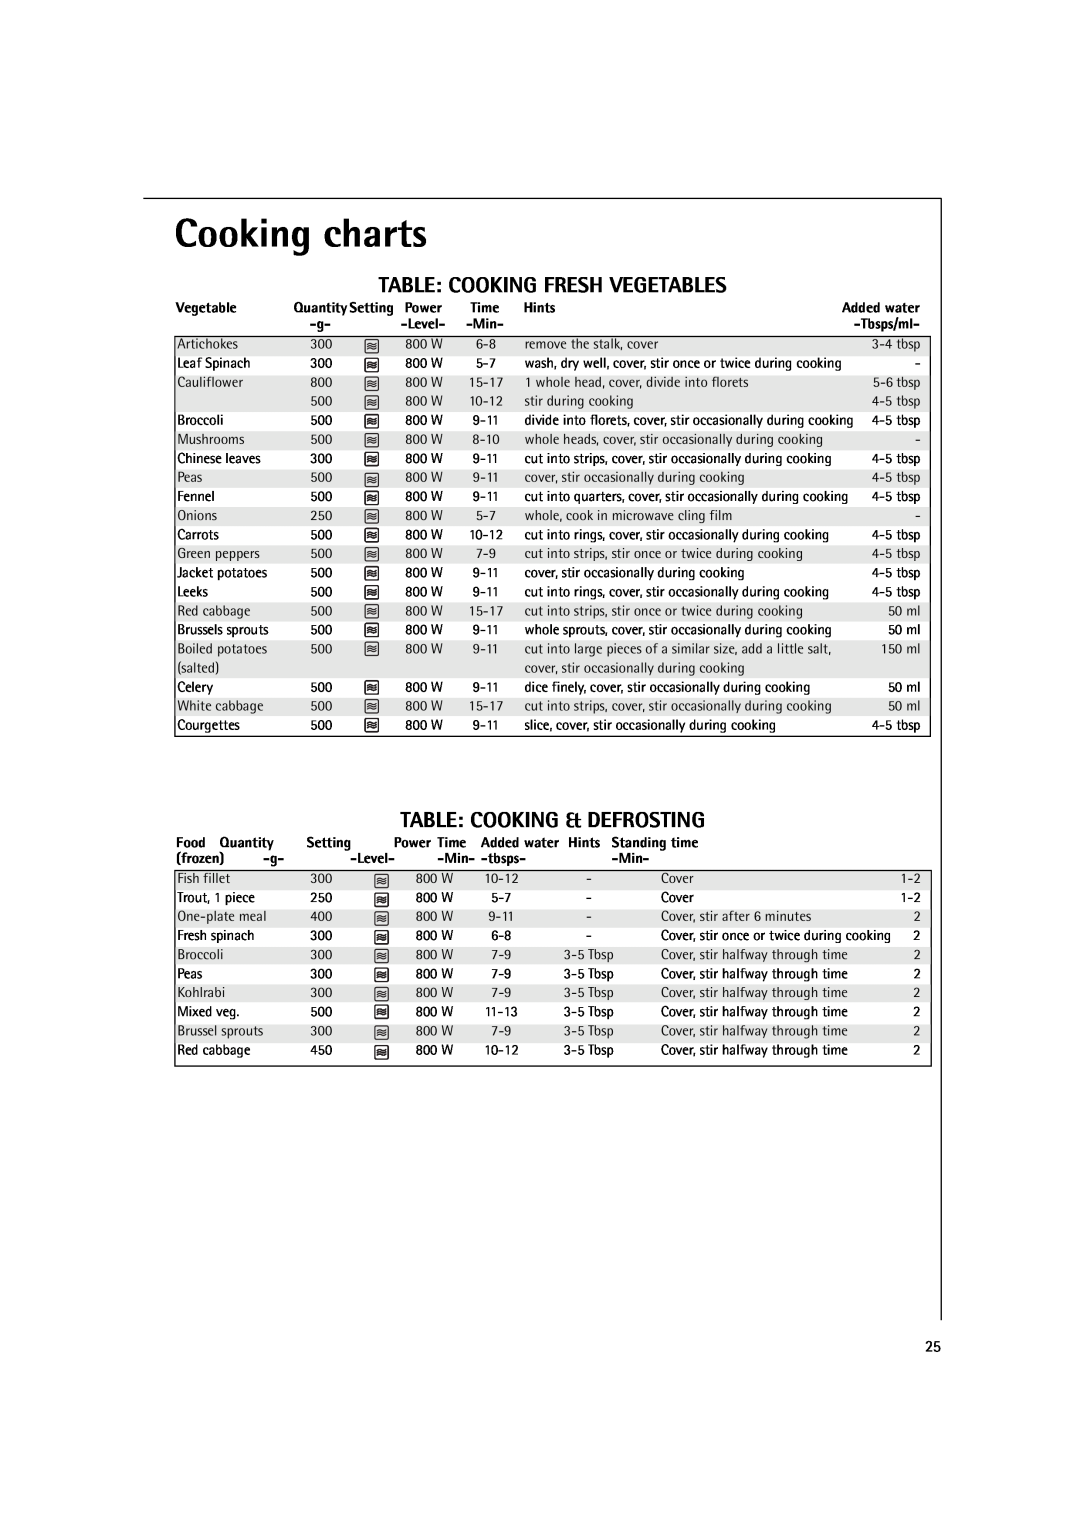 AEG MCD1751E Cooking charts, Table Cooking Fresh Vegetables, Table Cooking & Defrosting, Power, Time, Hints, Level- -Min 